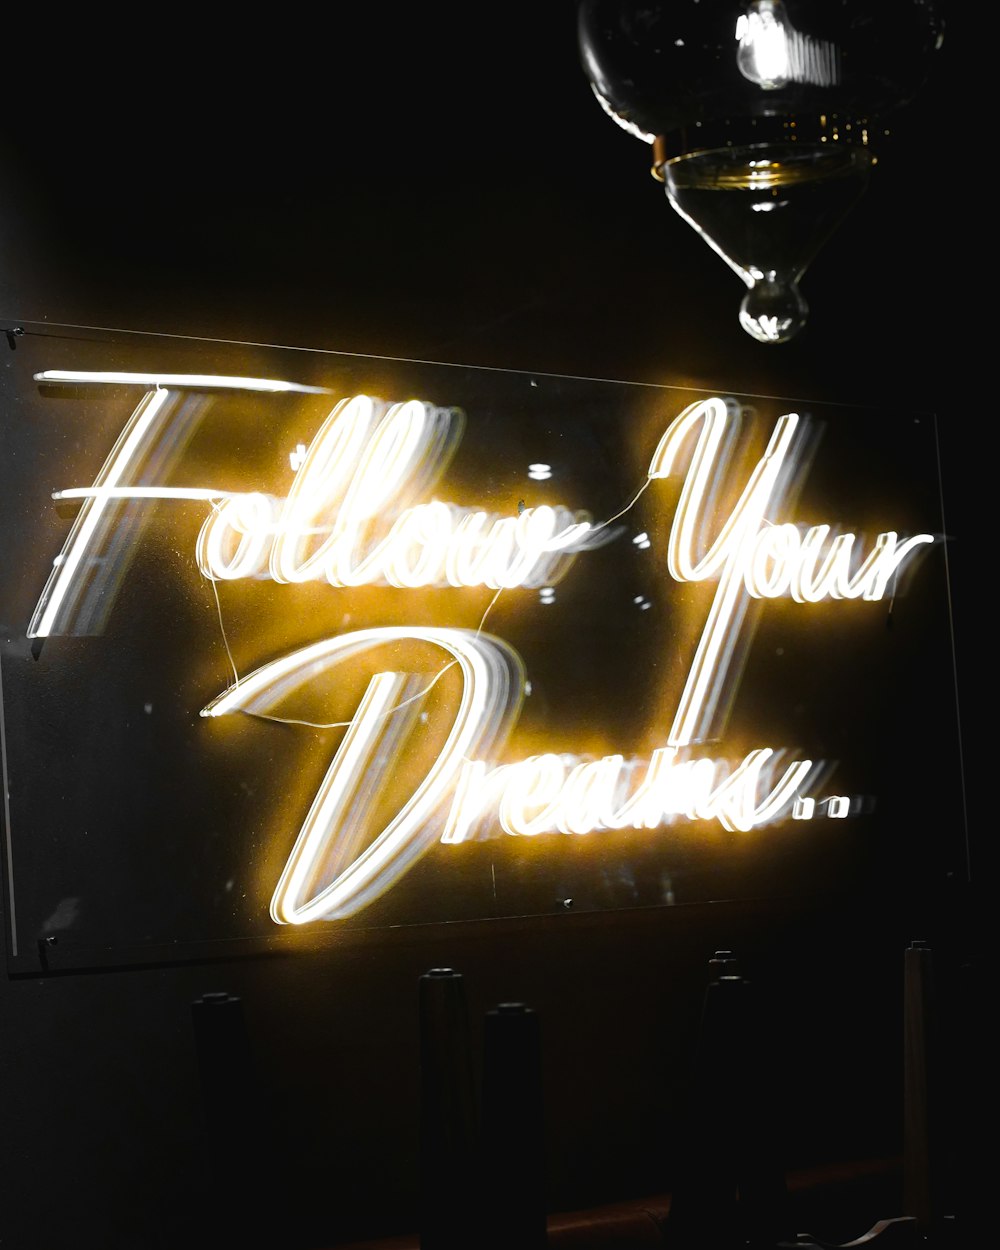 a neon sign that says follow your dreams